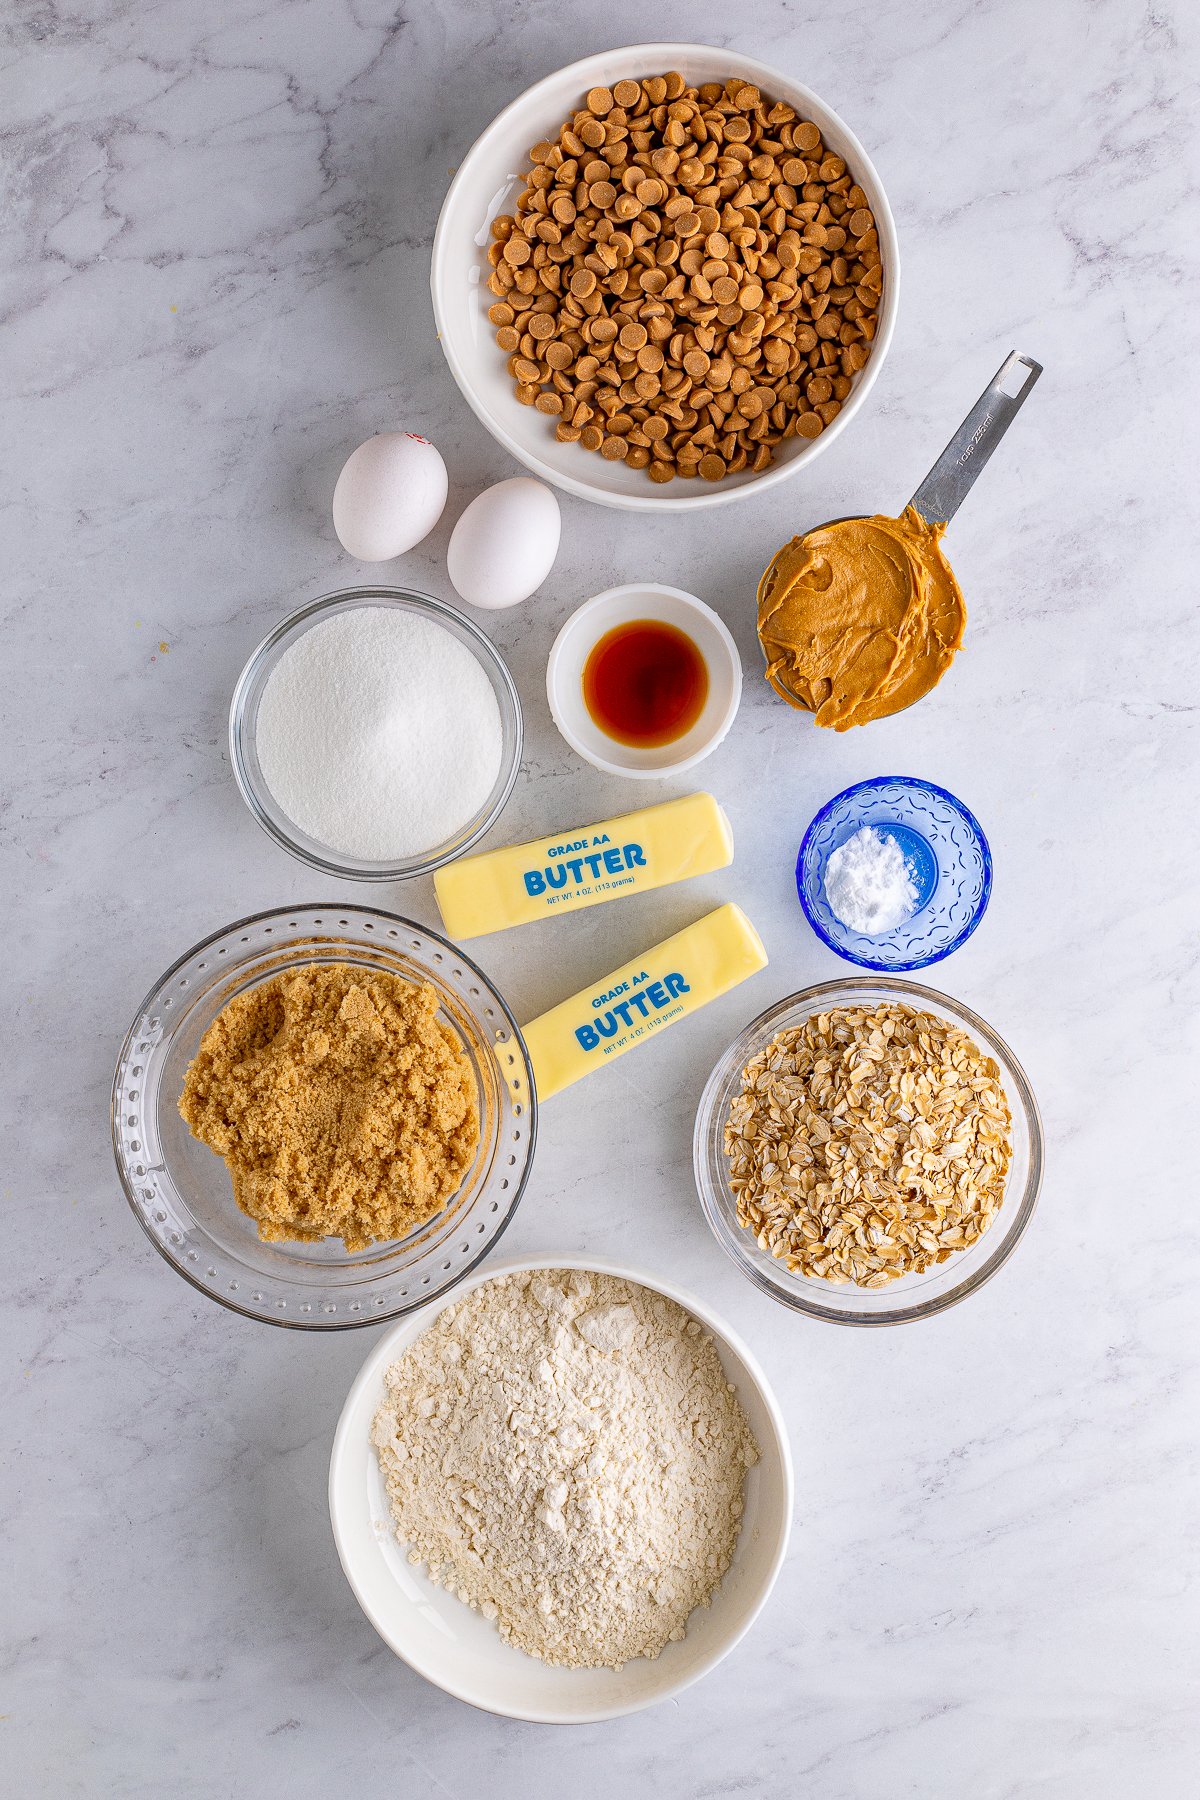 Ingredients needed to make Peanut Butter Oatmeal Cookies.